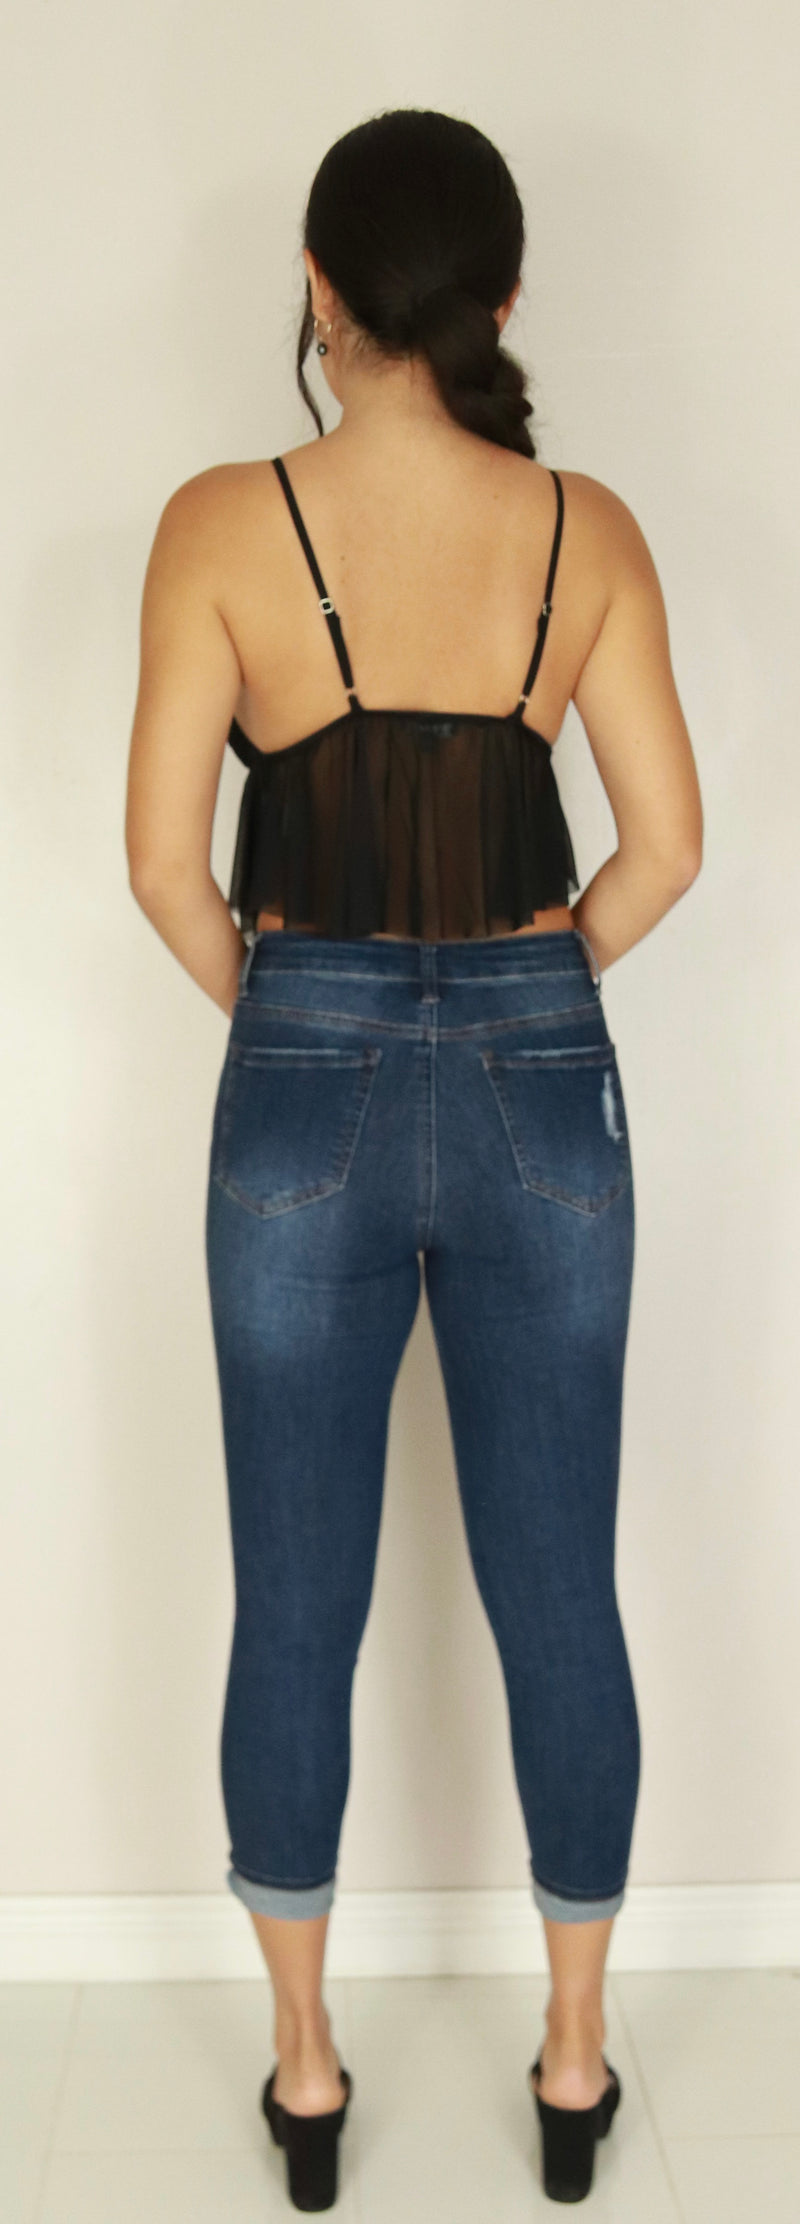 Jeans Warehouse Hawaii - S/L SOLID WOVEN TOPS - SHEER PEPLUM TOP | By MIOU MUSE